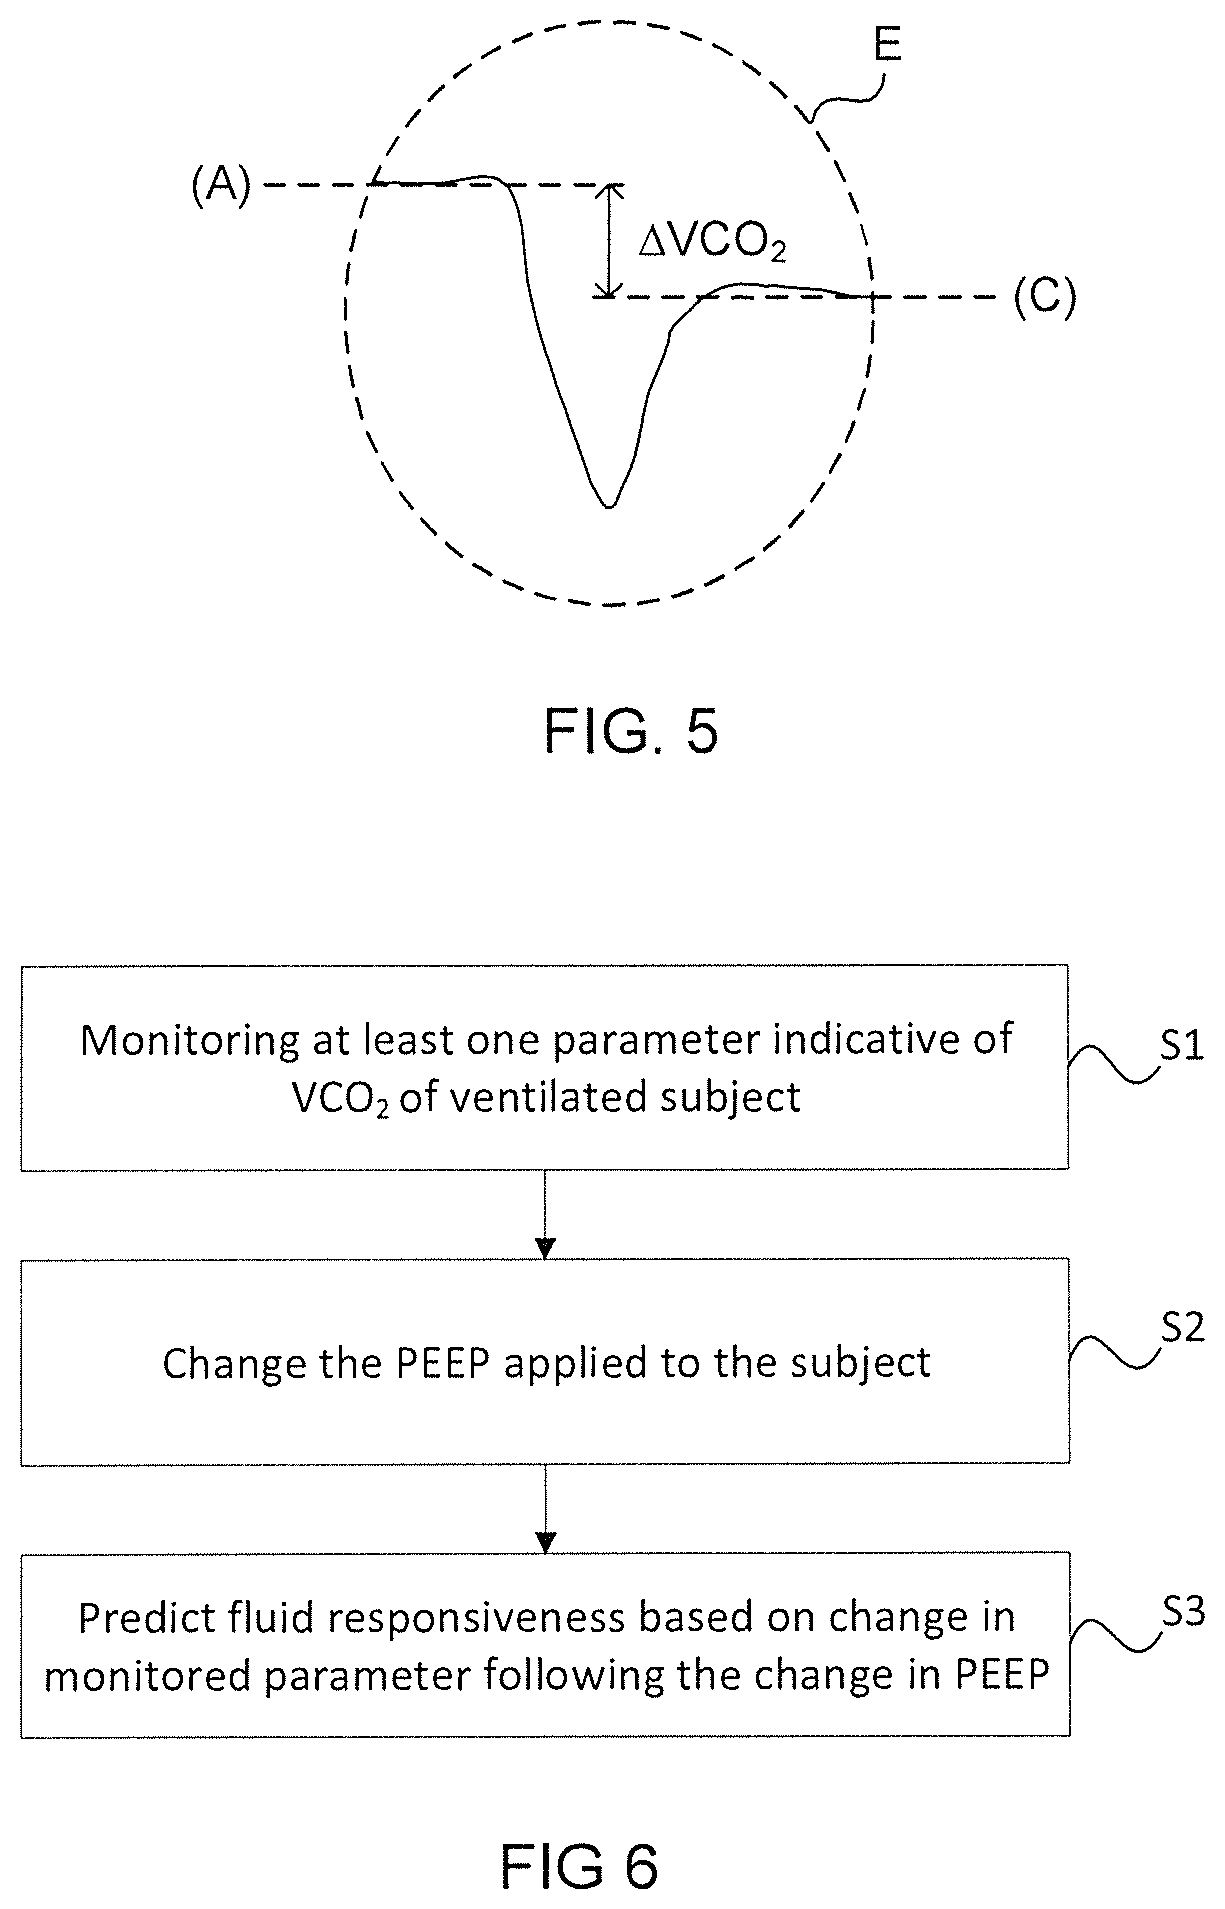 Method and apparatus for prediction of fluid responsiveness in mechanically ventilated subjects